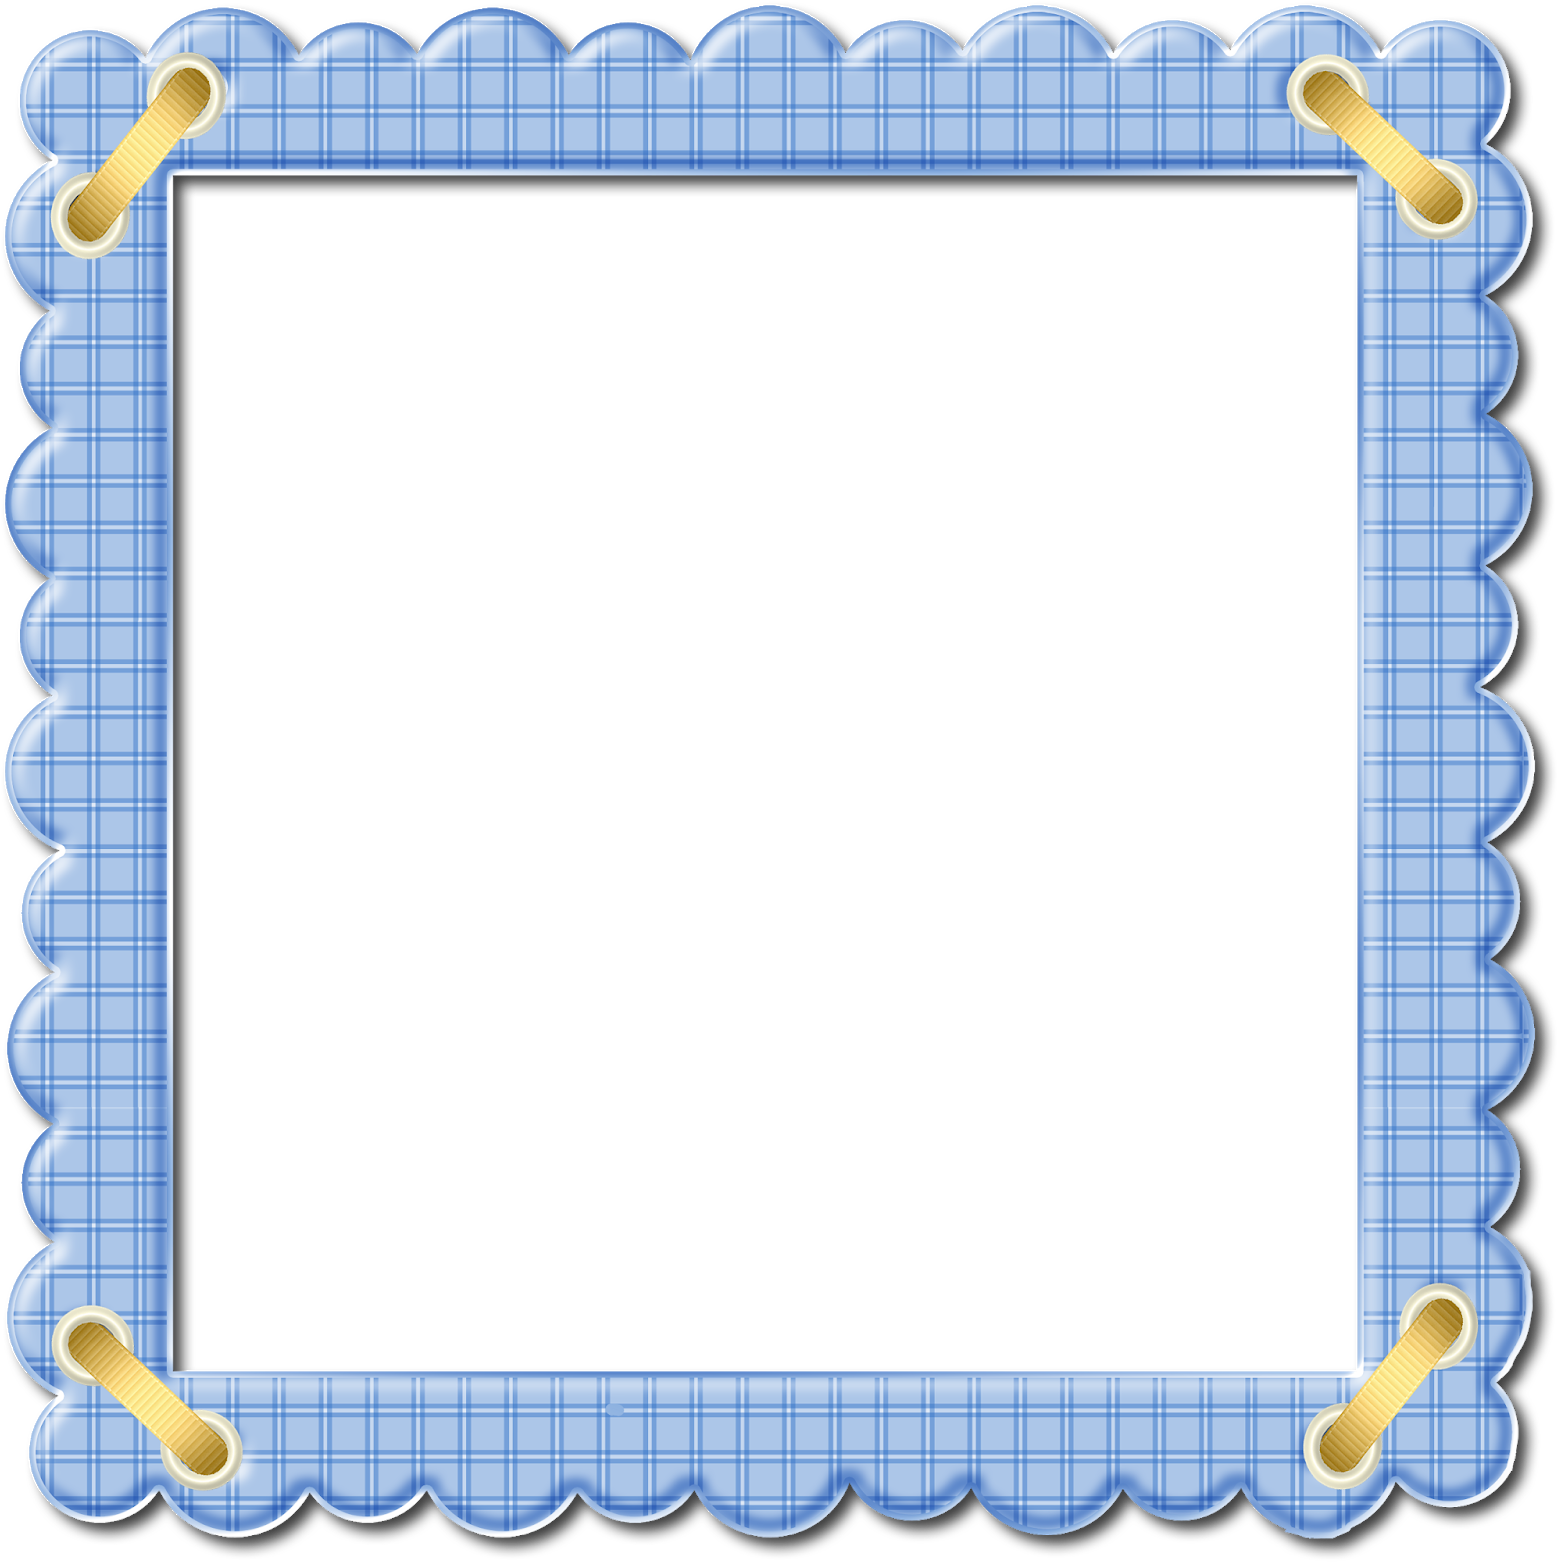 Na Prozrachnom Fone Transparent Frame For Boy Png 1593x1600 Png Clipart Download